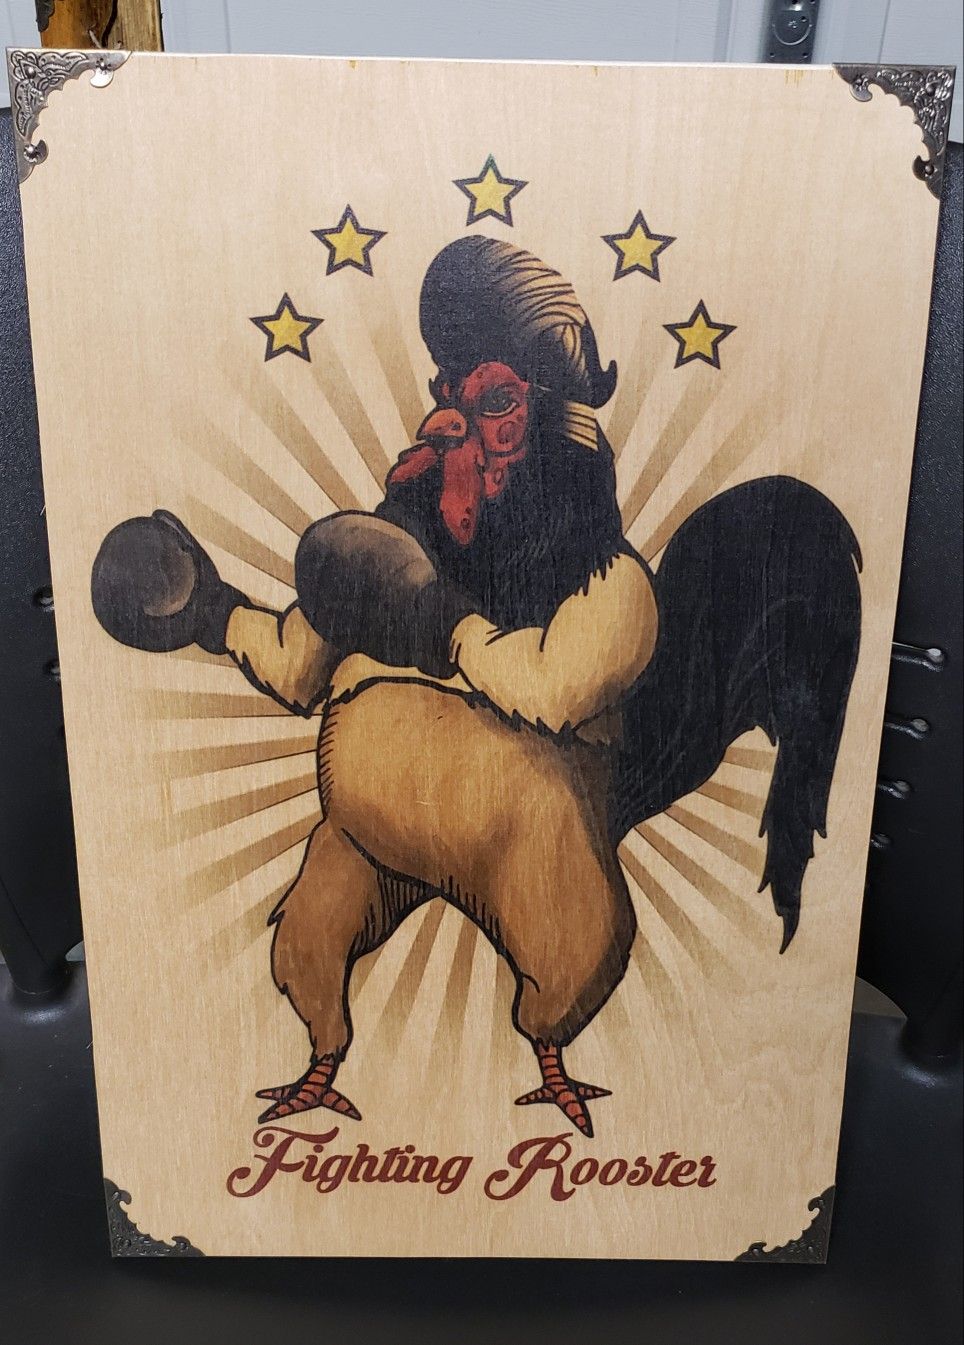 18" x 12" Rockabilly Boxing Rooster Frame